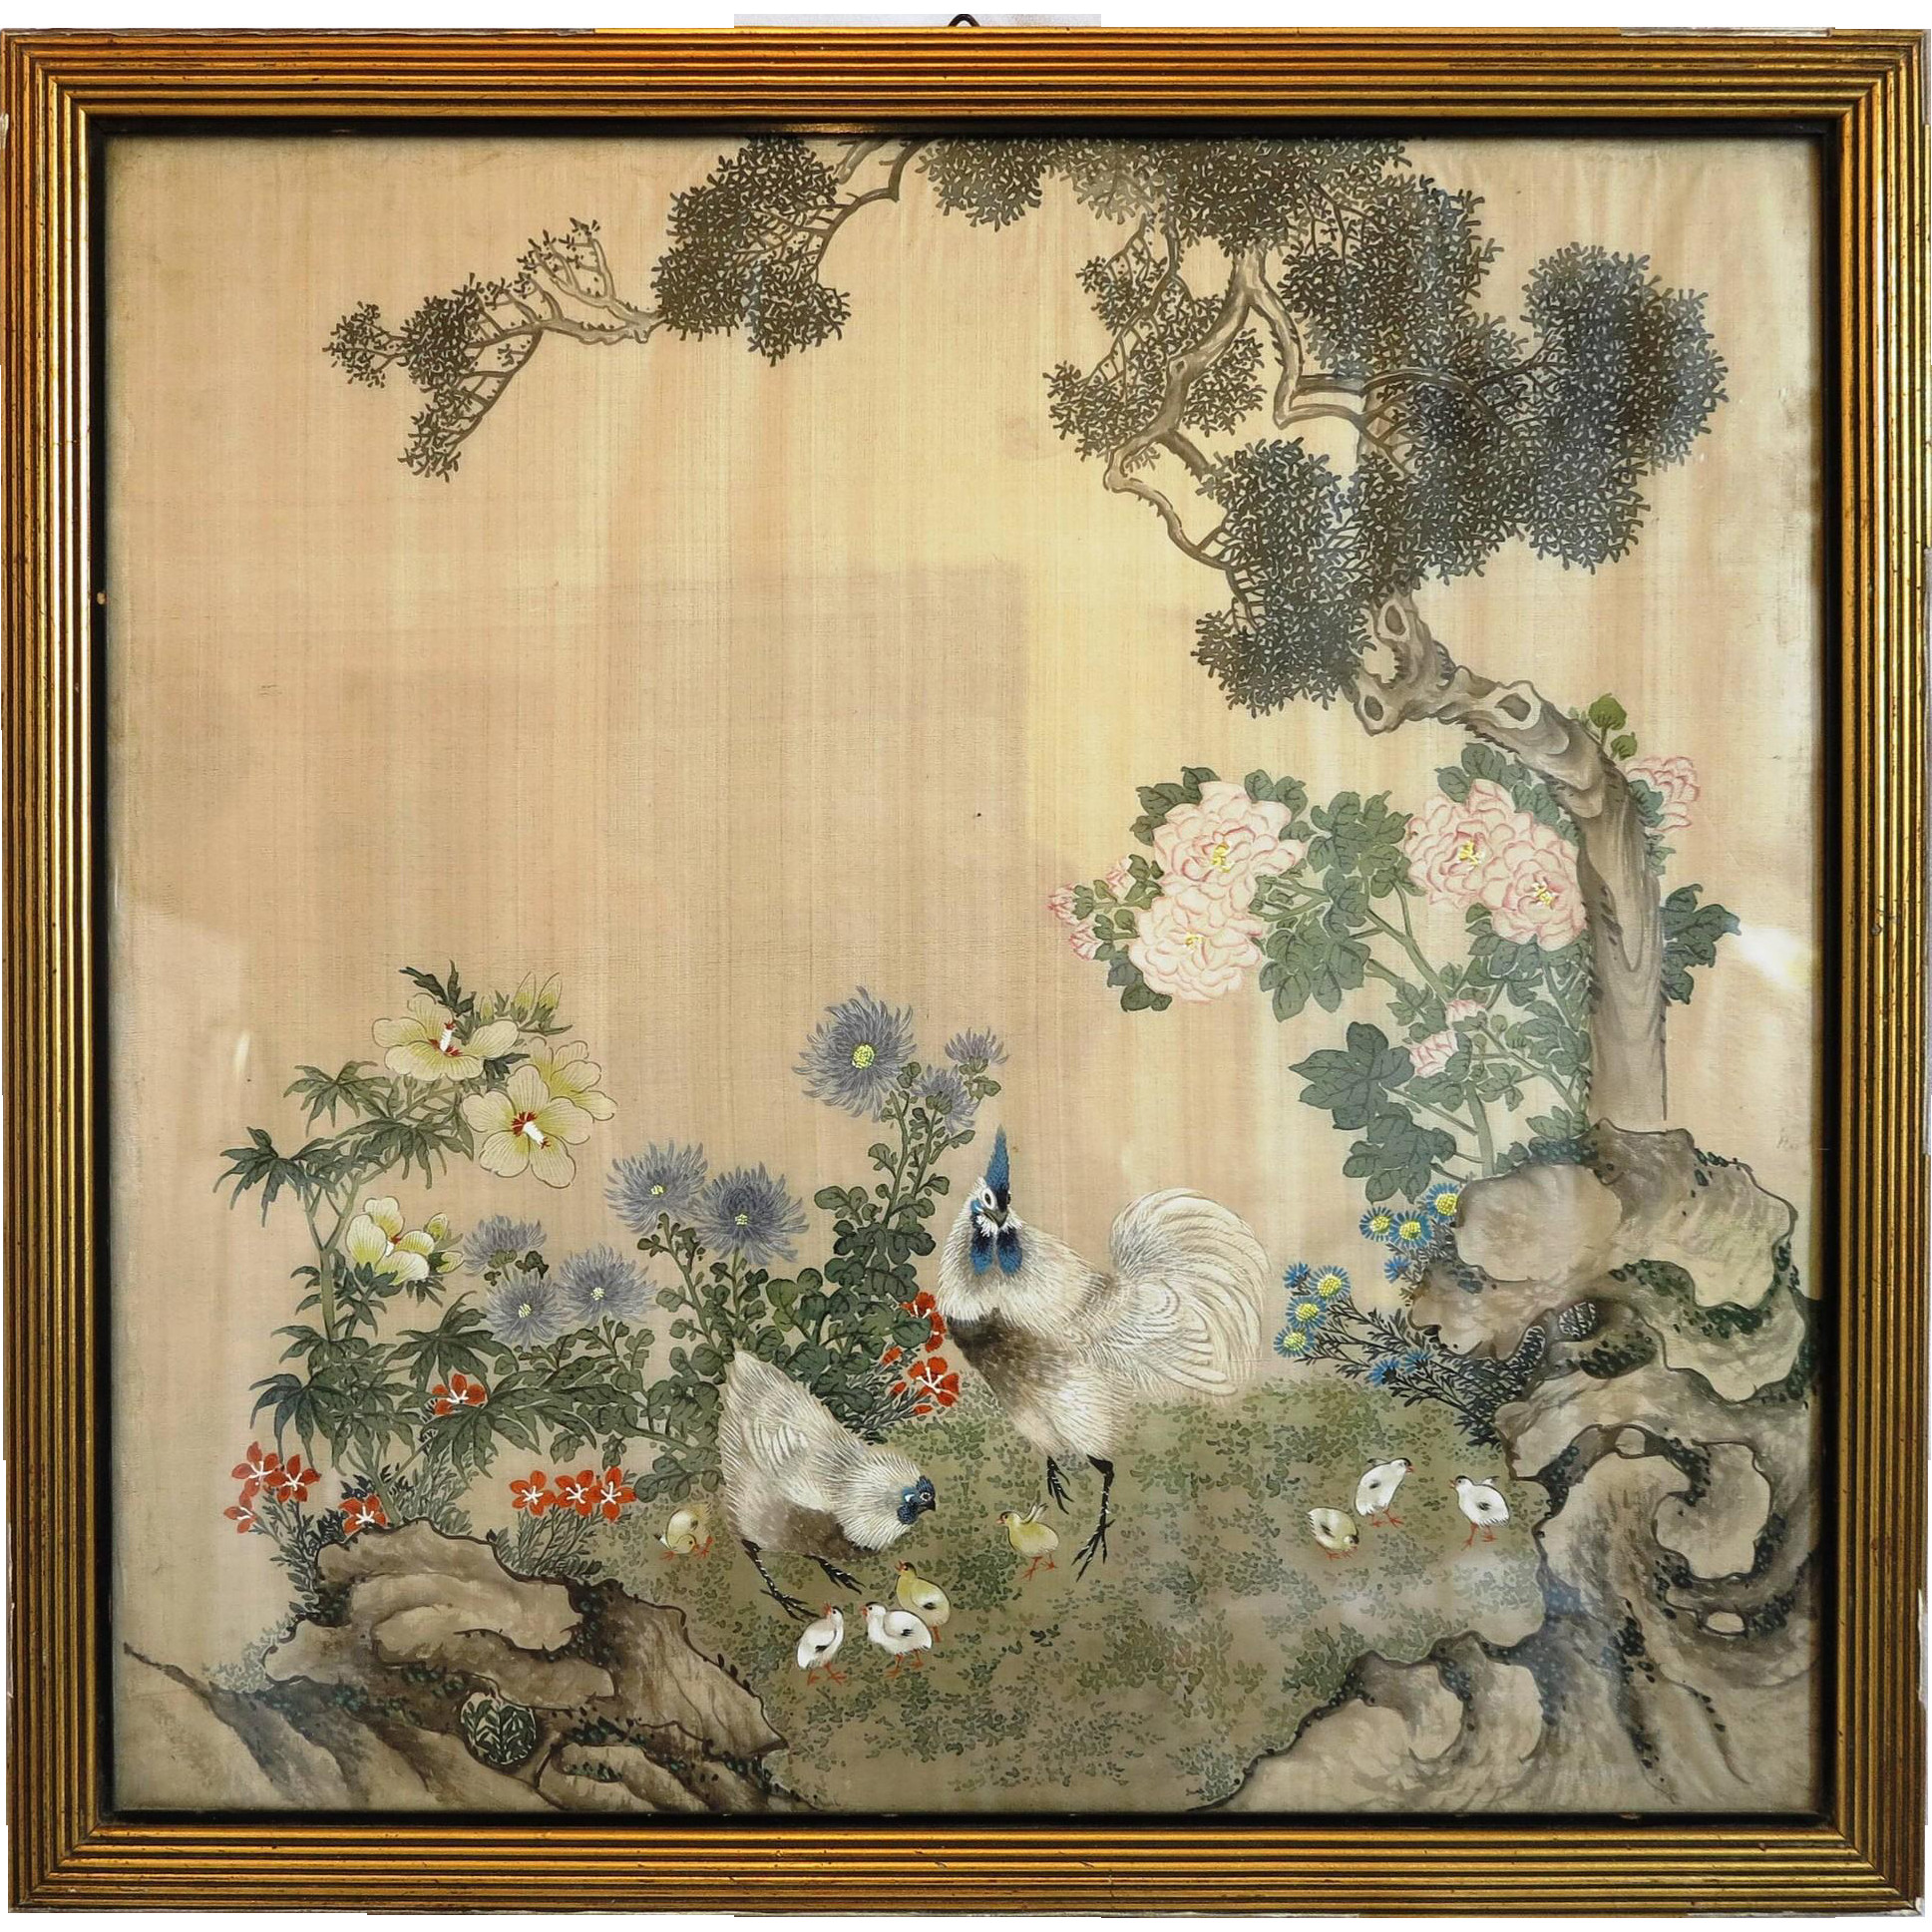 Japan Landscape Painting
 Japanese landscape silk painting ca 1920 from chateau on